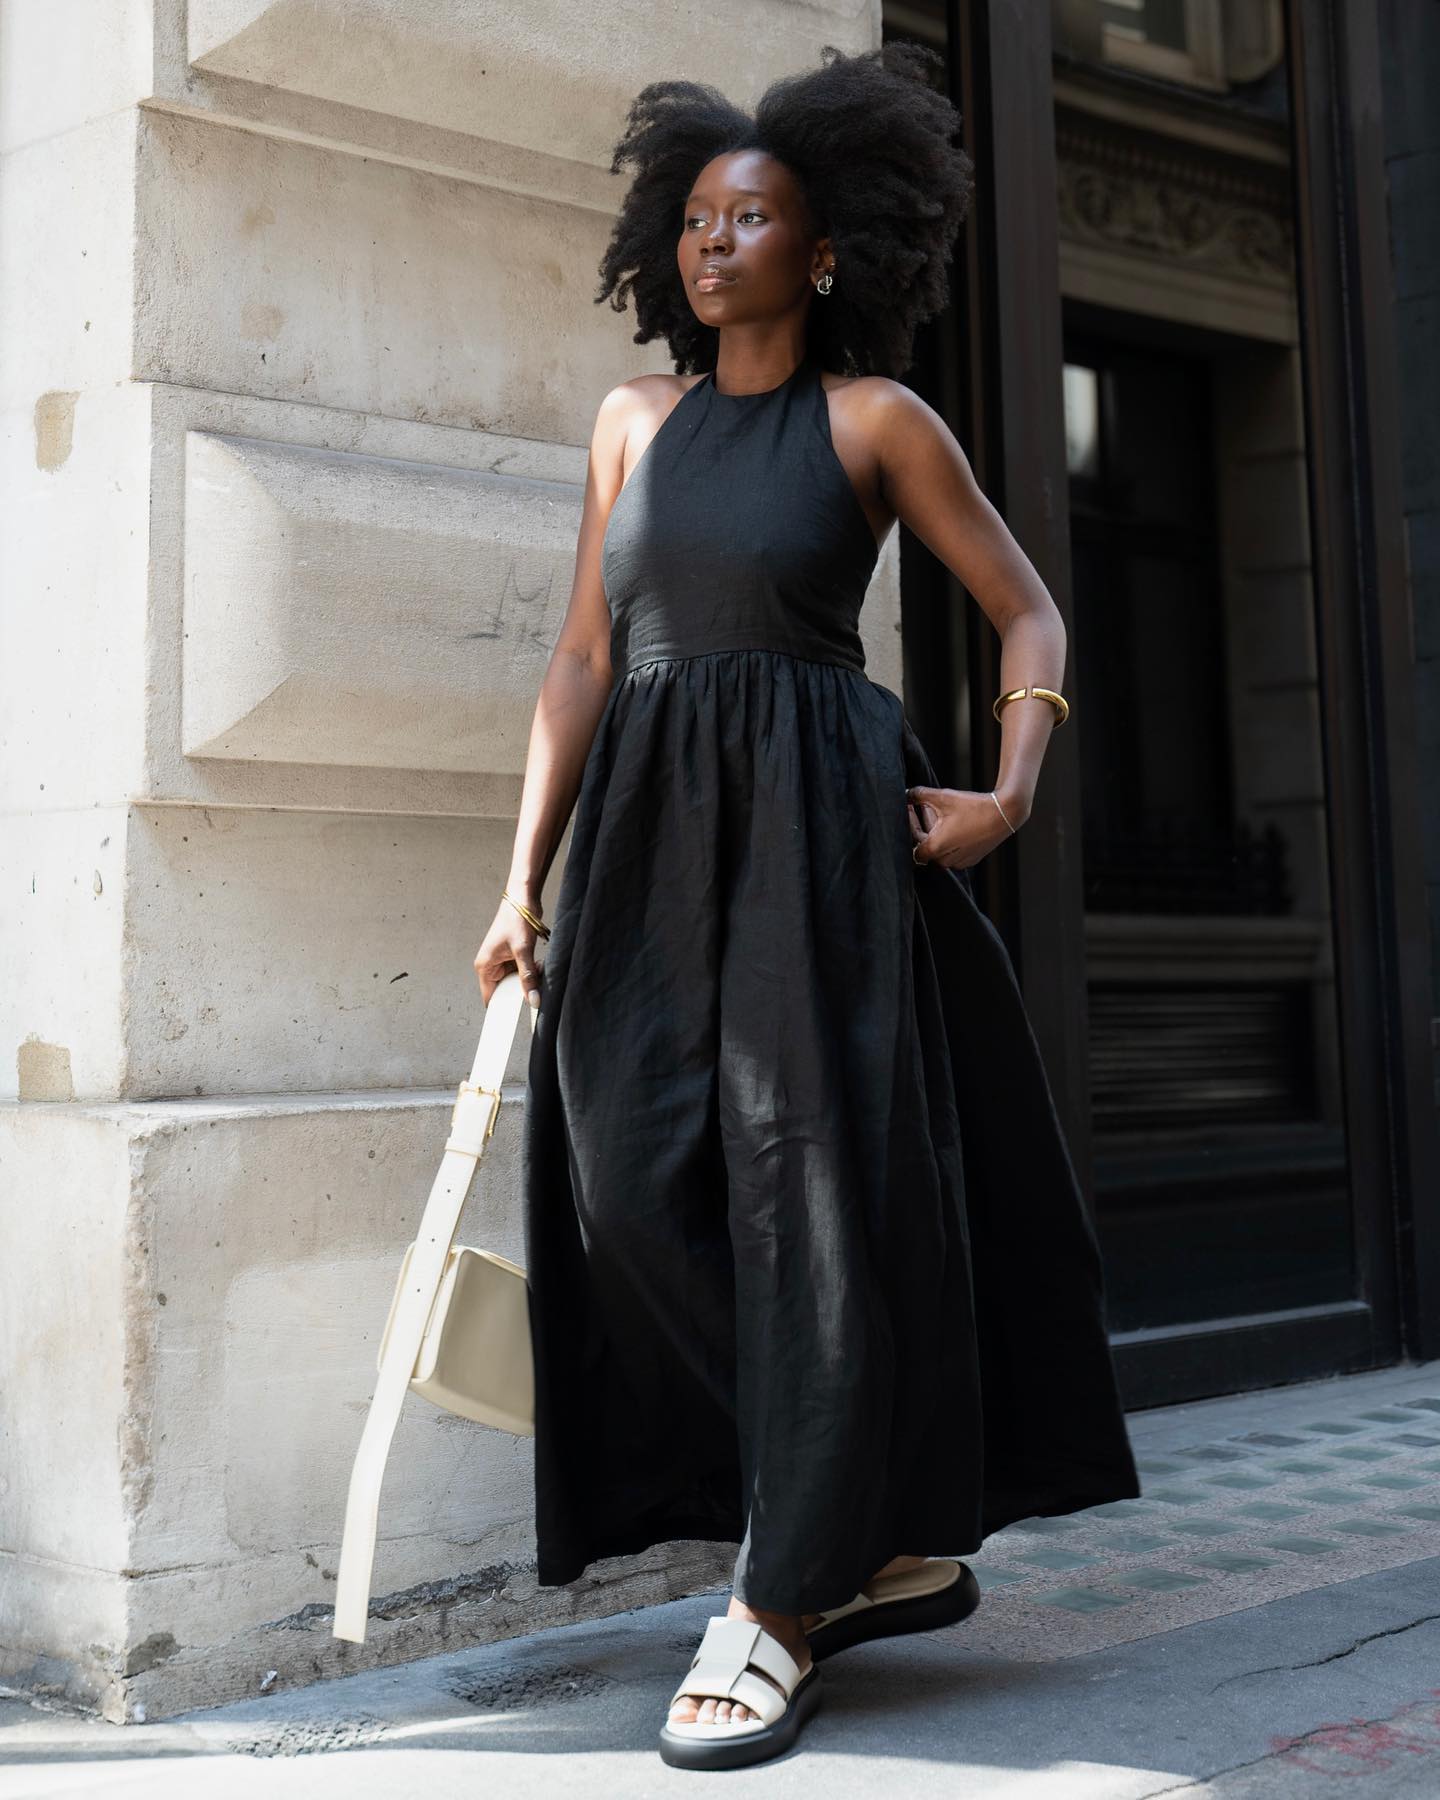 How Fashion People Wear Simple Black Dresses and Sandals | Who What Wear